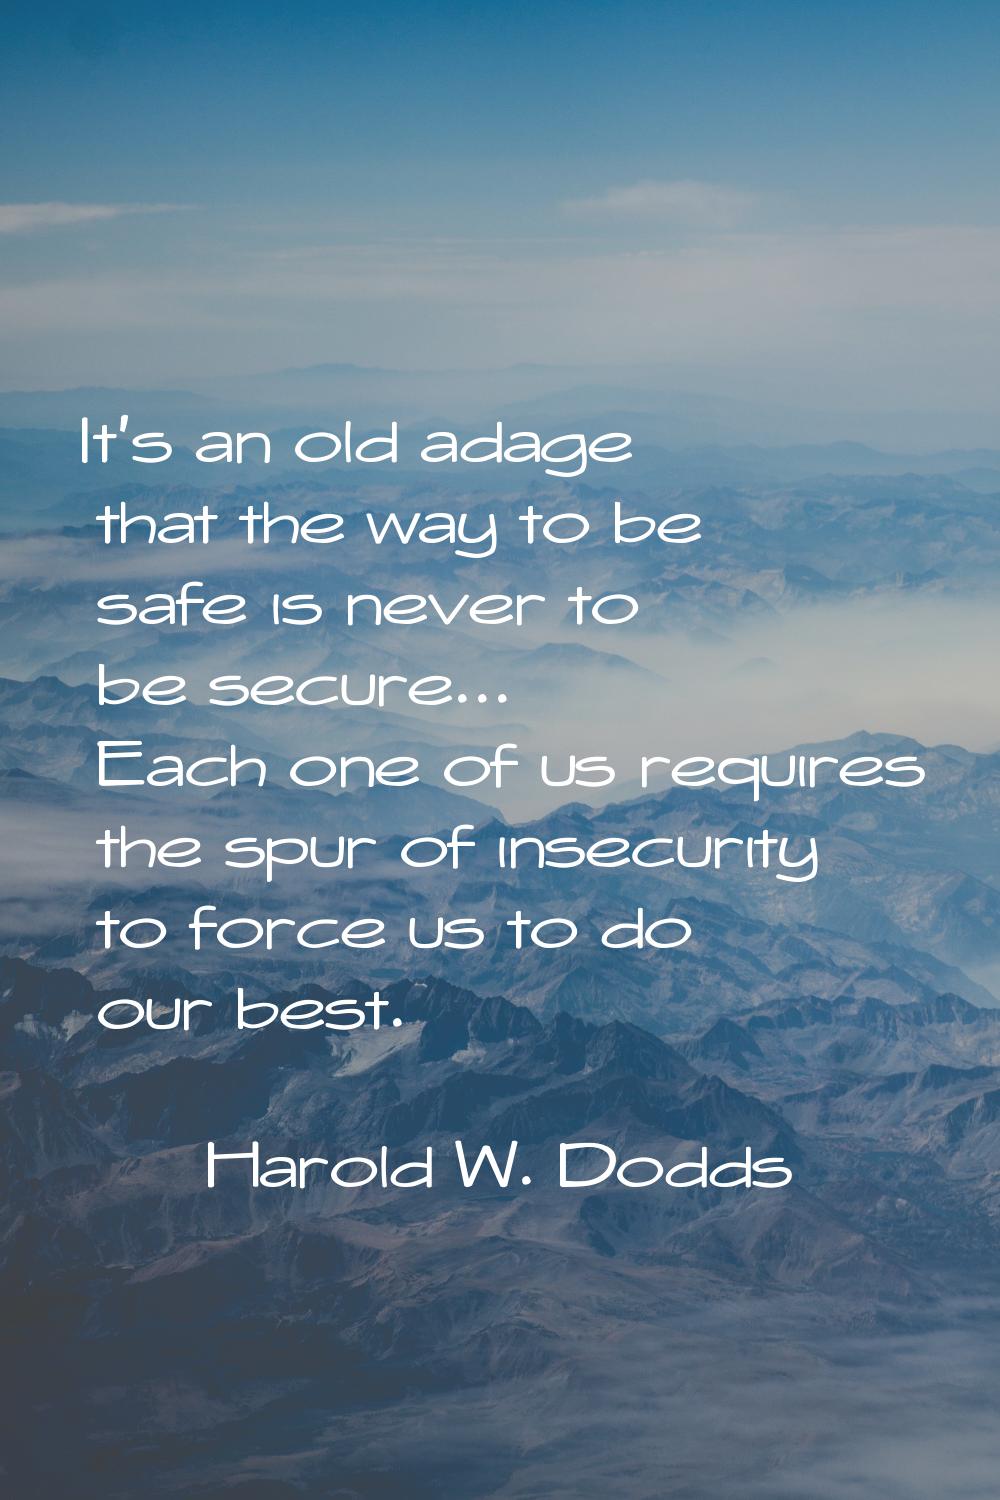 It's an old adage that the way to be safe is never to be secure... Each one of us requires the spur